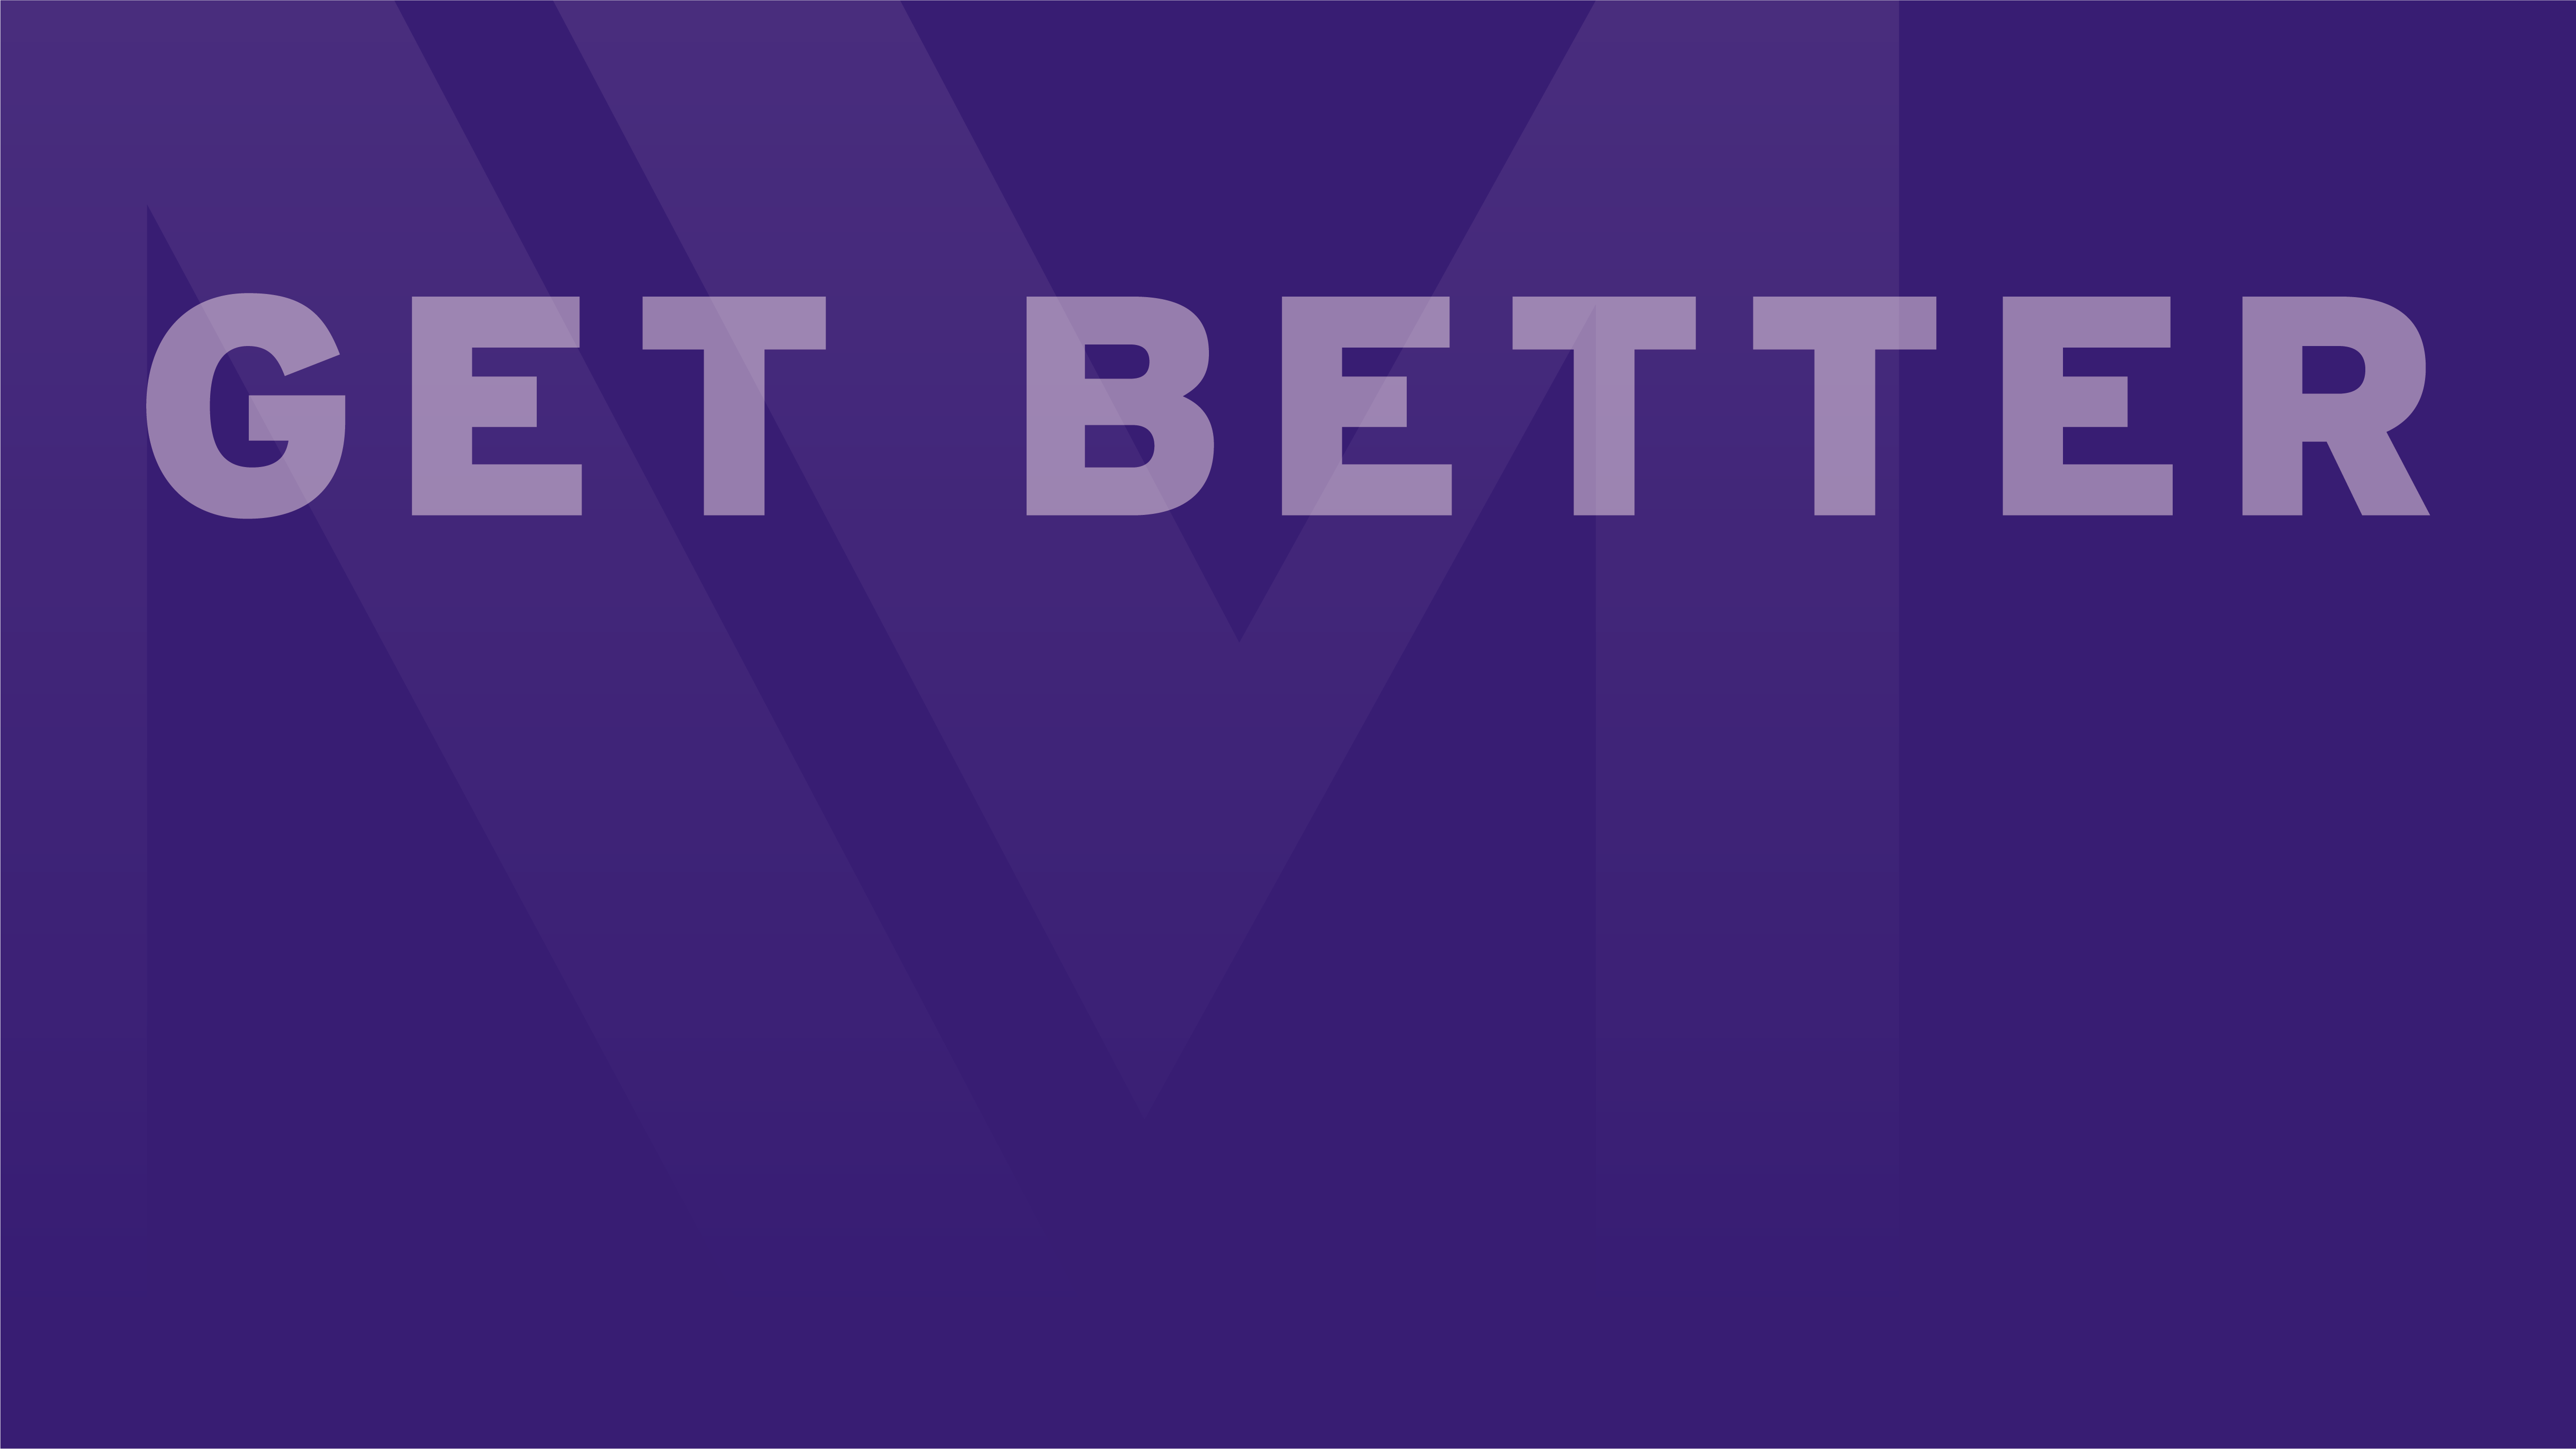 Purple background with faint NM logo in the background and the words "Get Better" in the foreground in light purple at the top